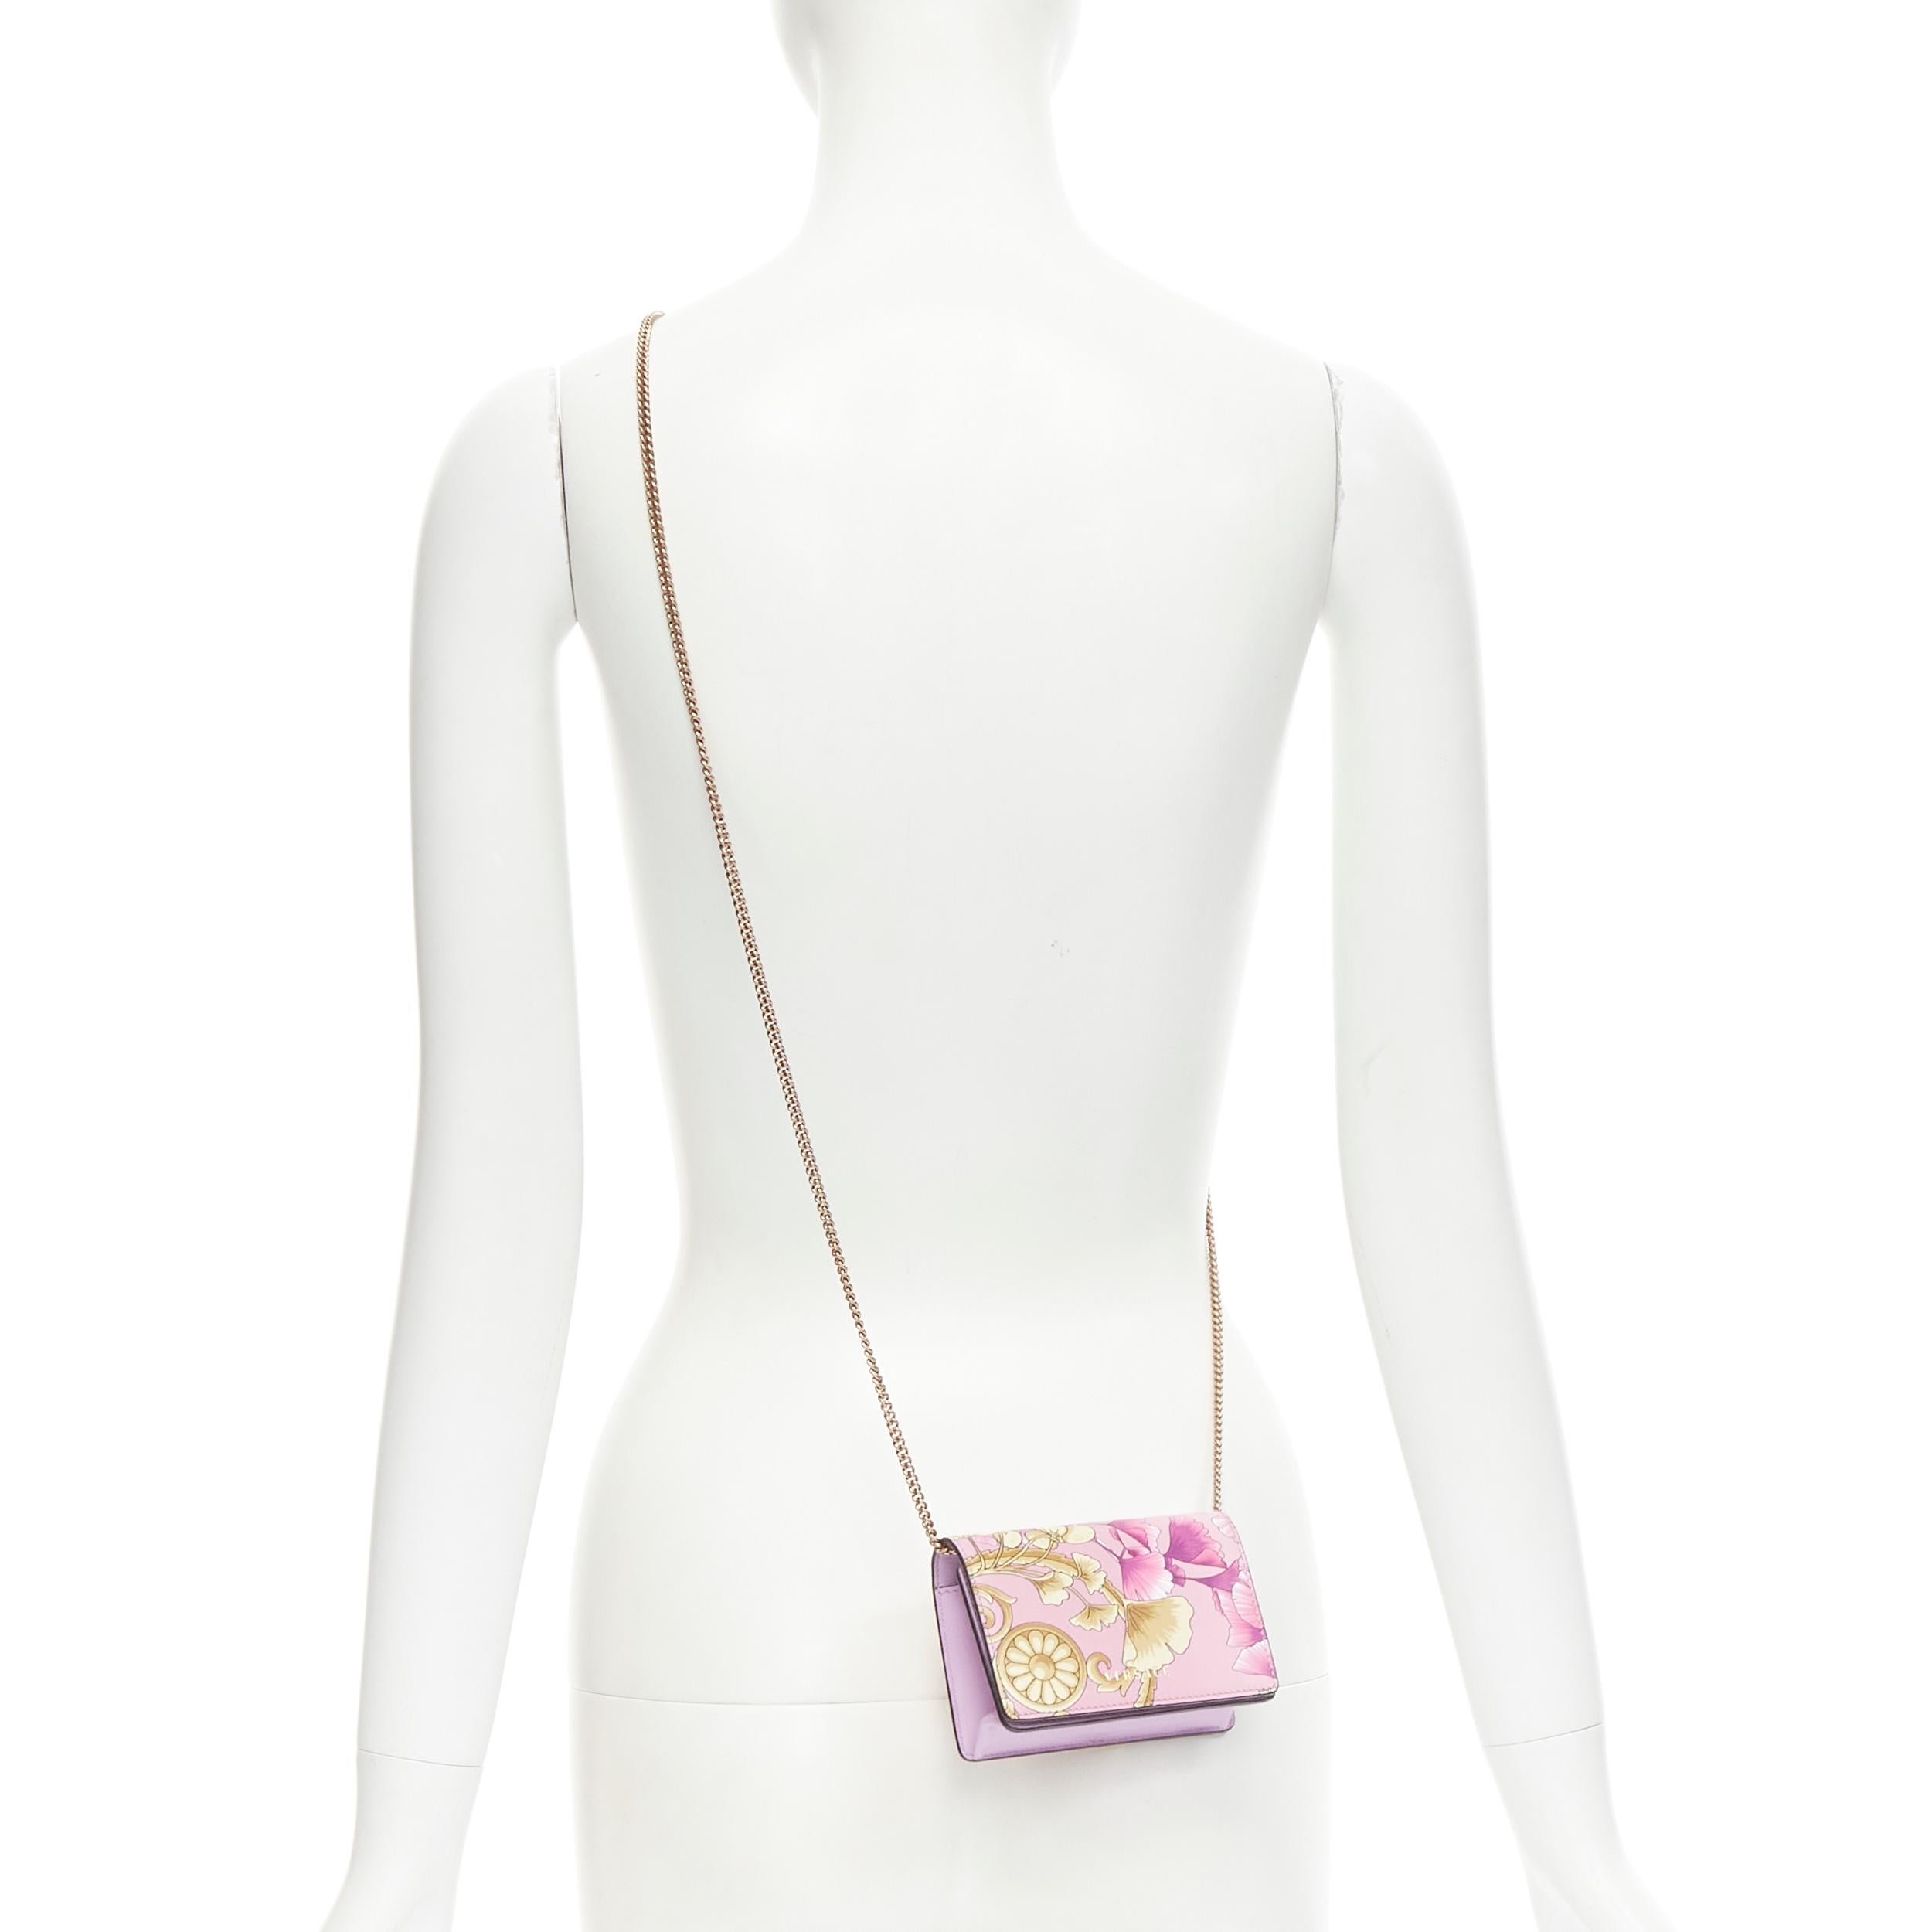 new VERSACE Gingko Barocco pink gold floral leather wallet crossbody micro bag 
Reference: TGAS/C00221 
Brand: Versace 
Designer: Donatella Versace 
Model: DP3H538K D3VSTG KMC6T 
Collection: Gingko Barocco 
Material: Leather 
Color: Pink 
Pattern: